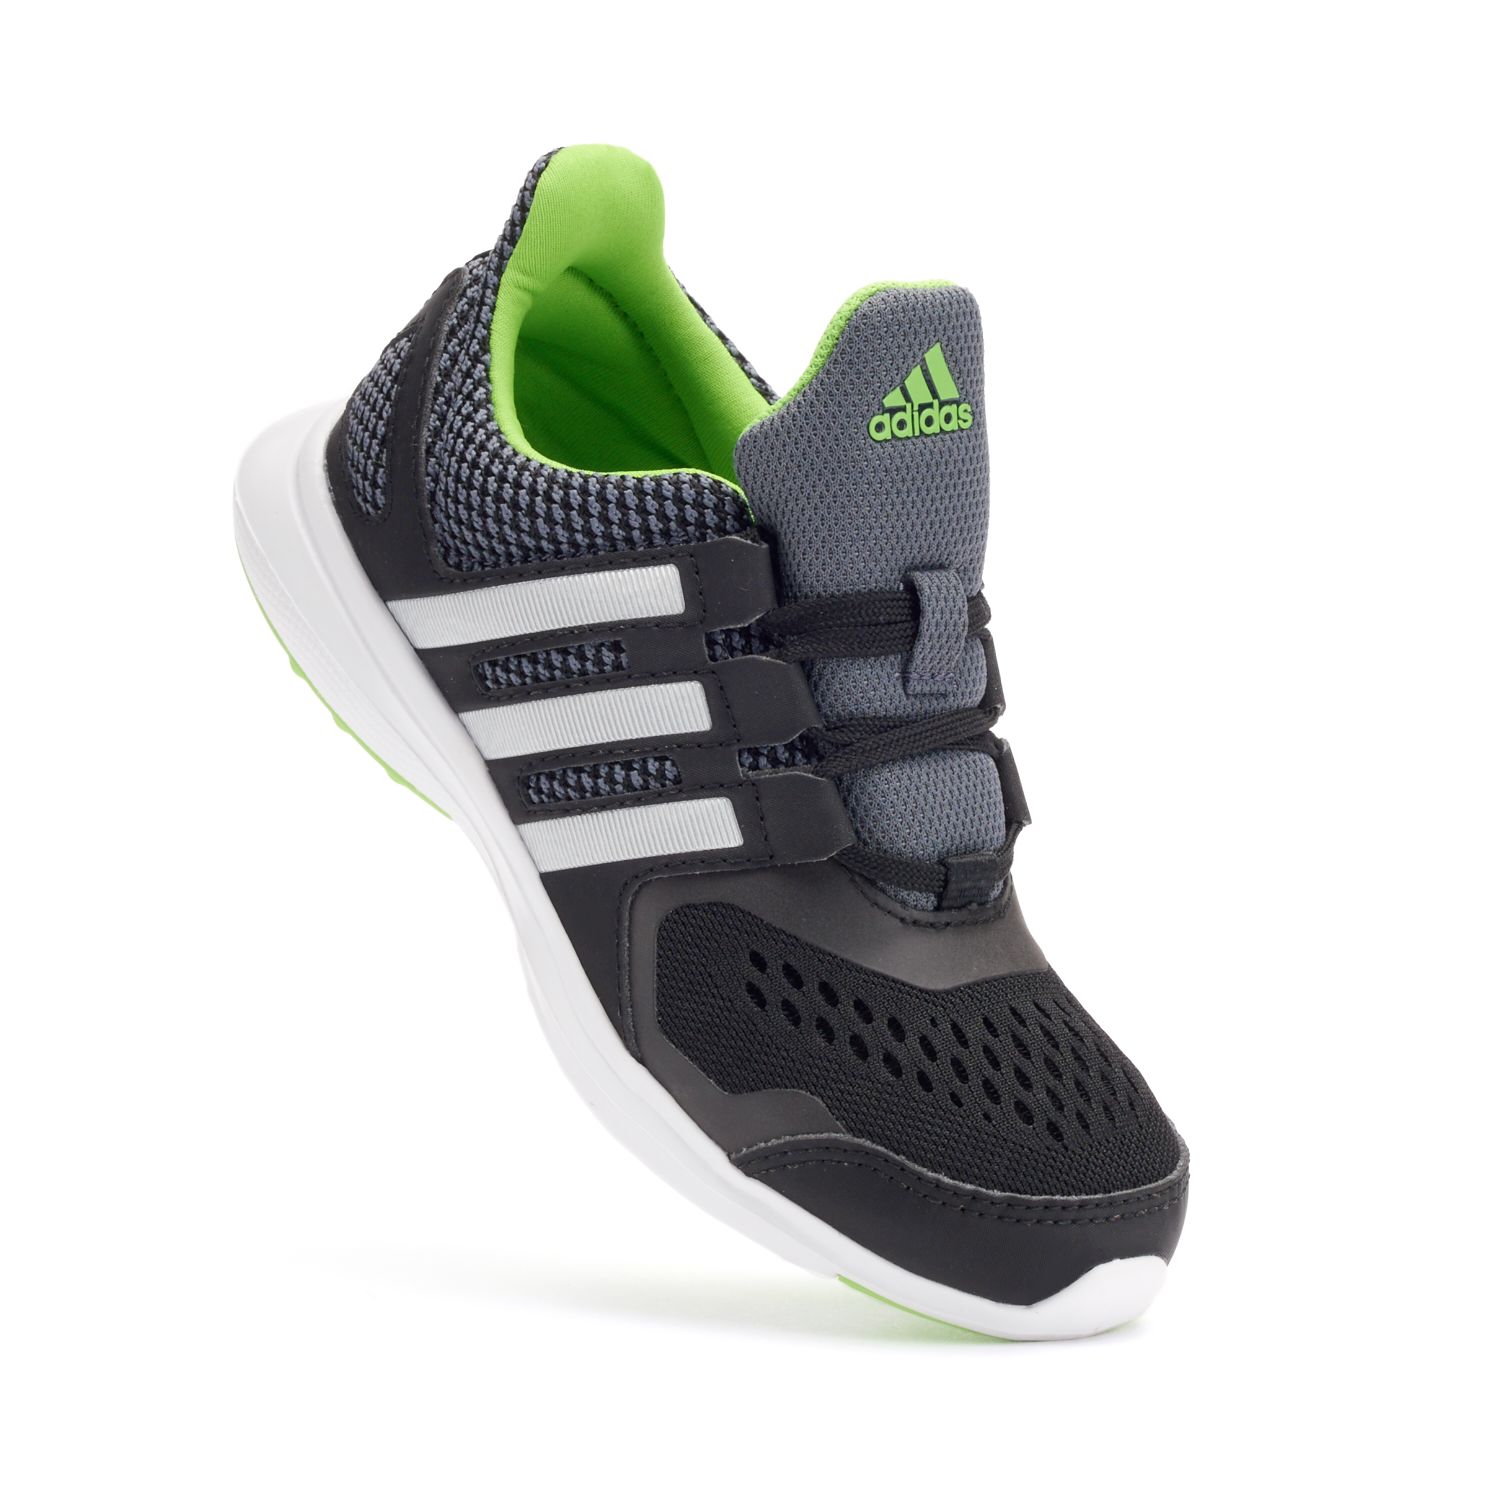 adidas childrens running shoes